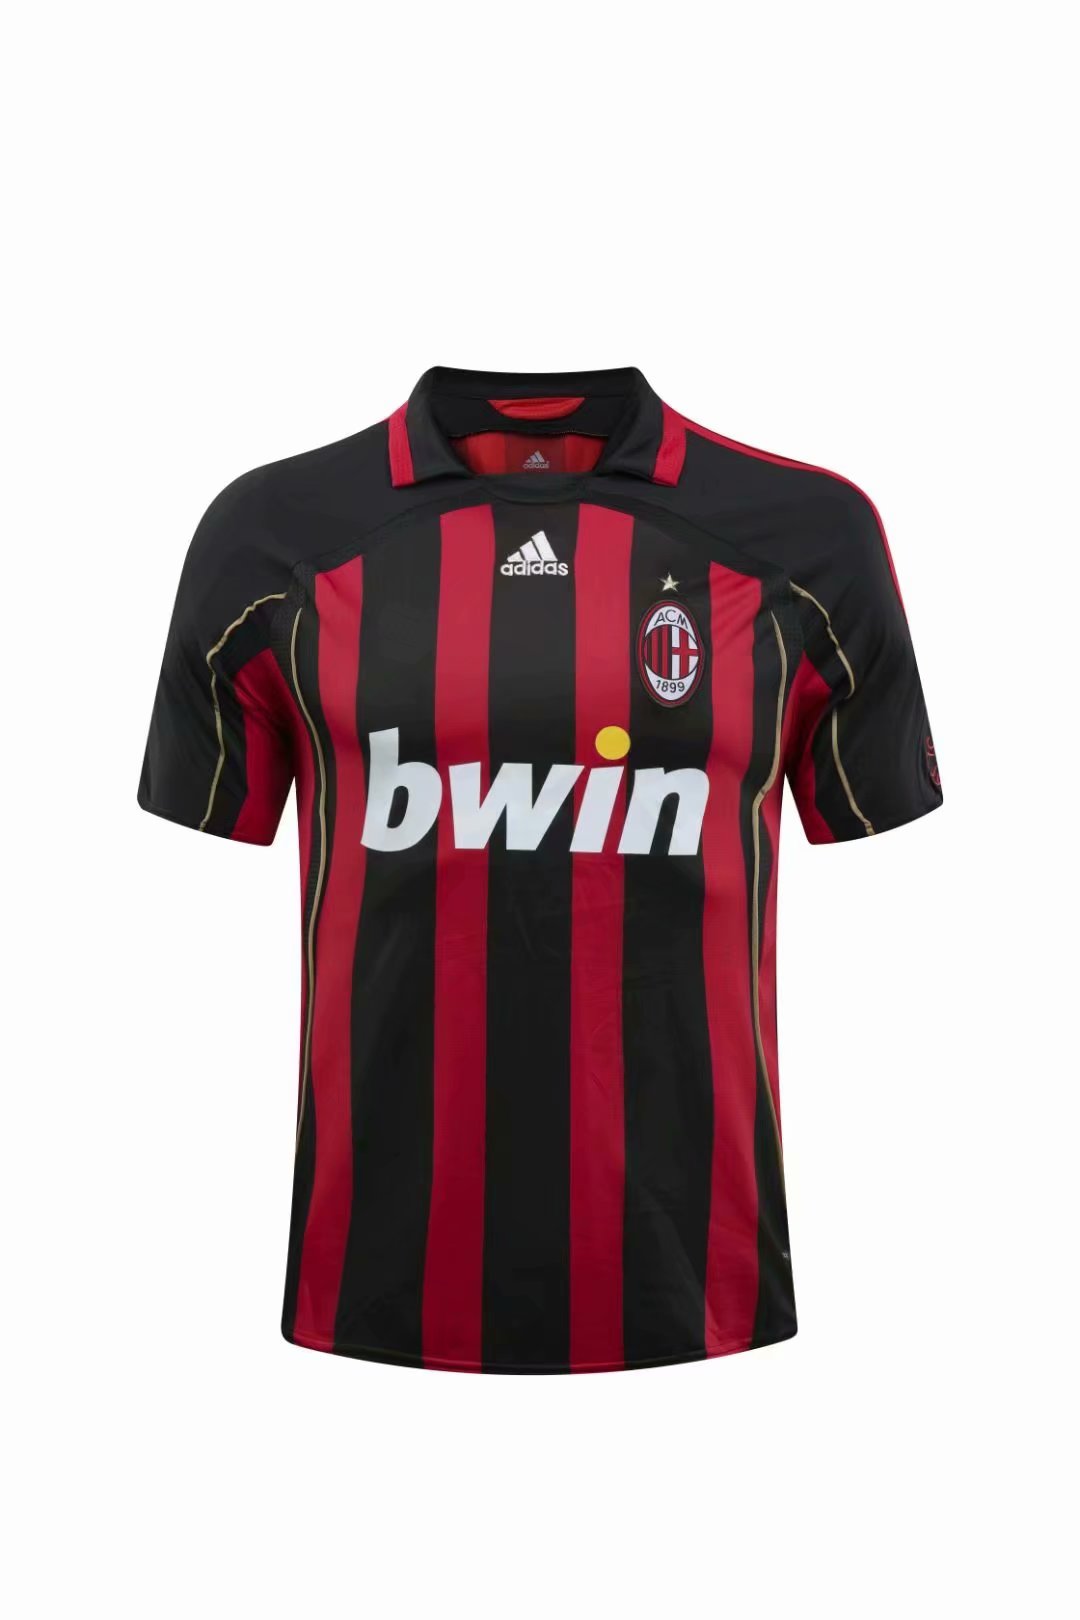 06-07 Retro Version AC Milan Home Red & Black Thailand Soccer Jersey AAA-601